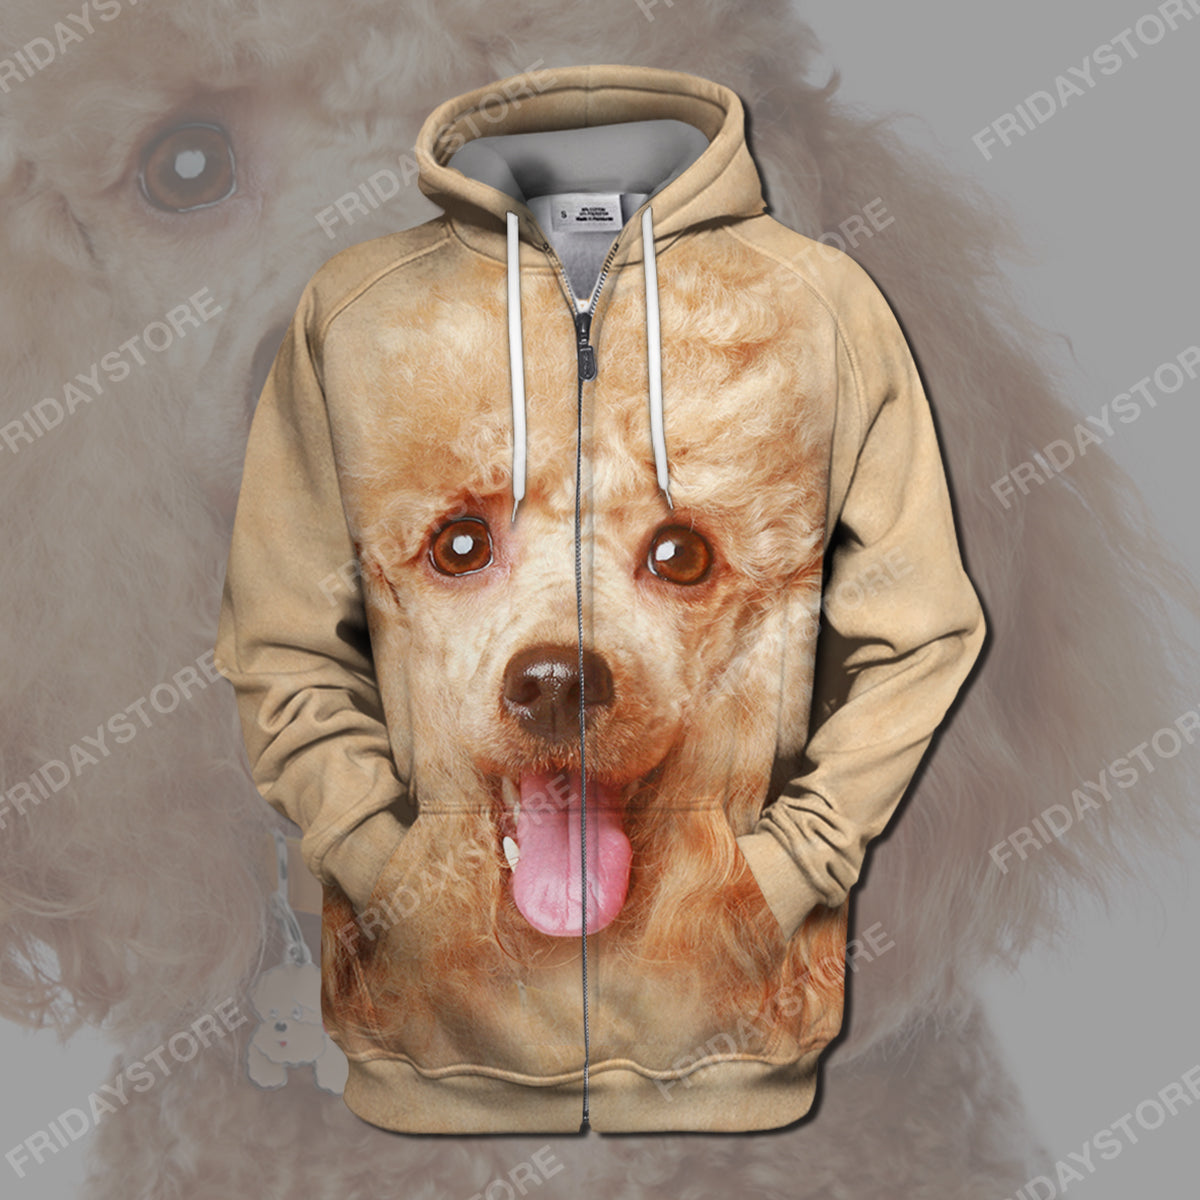 Unifinz Dog Hoodie Poodle Hoodie Poodle Dog Graphic Pale Yellow Hoodie Cute Dog Shirt Sweater Tank Apparel 2026